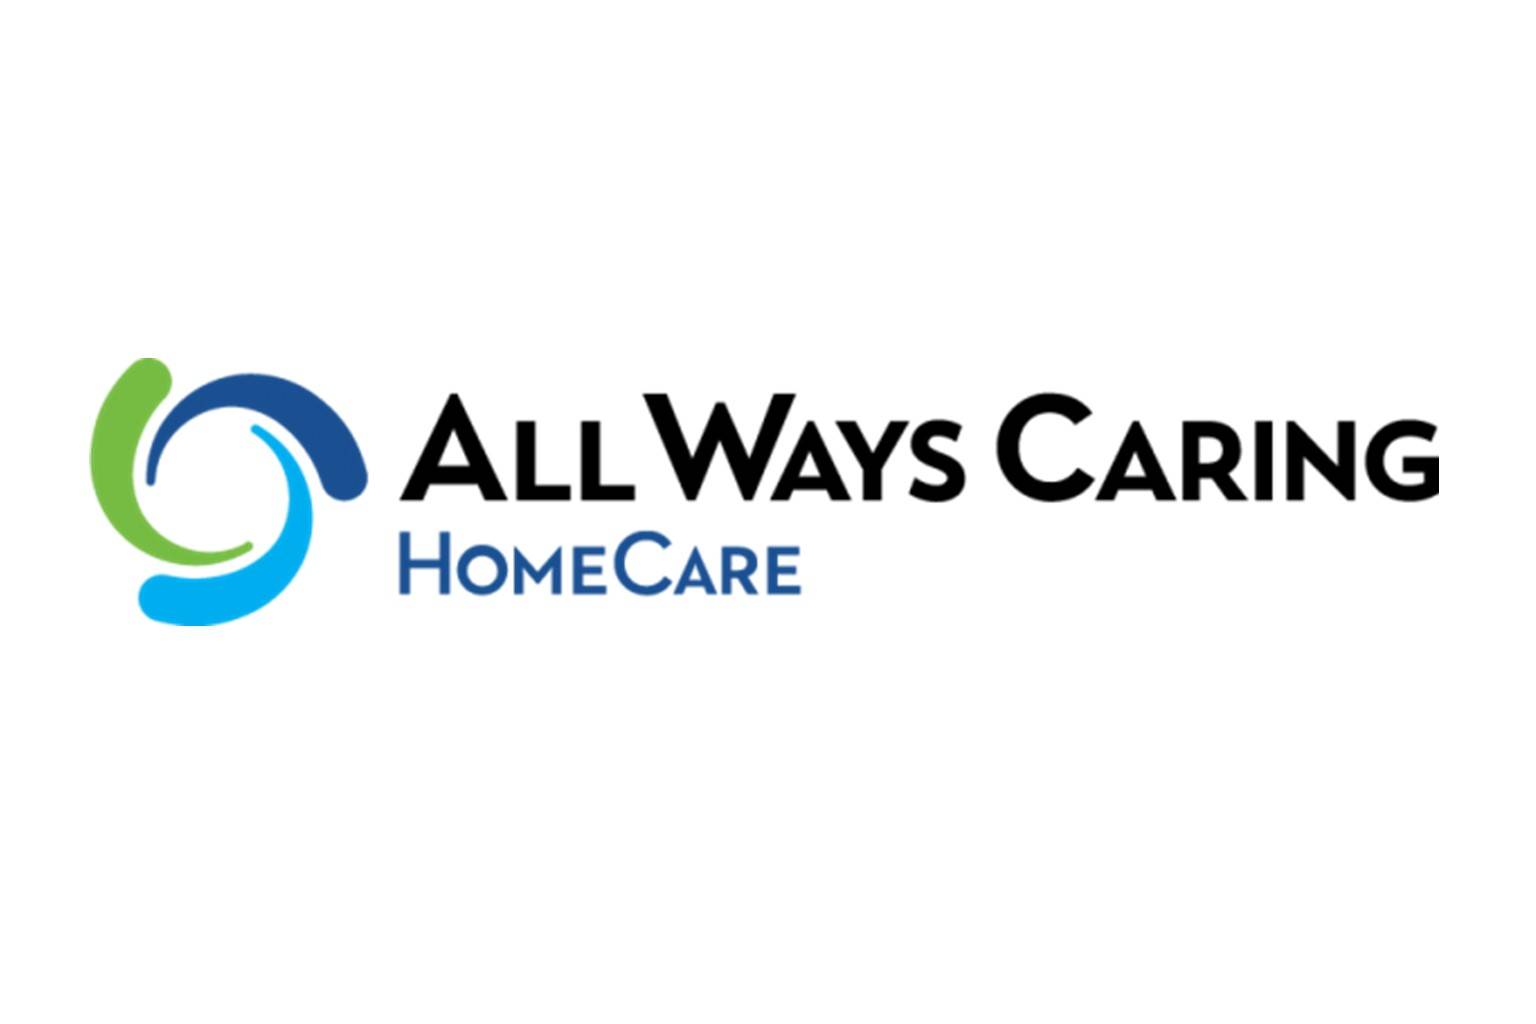 ResCare HomeCare is becoming All Ways Caring | ResCare - ResCare